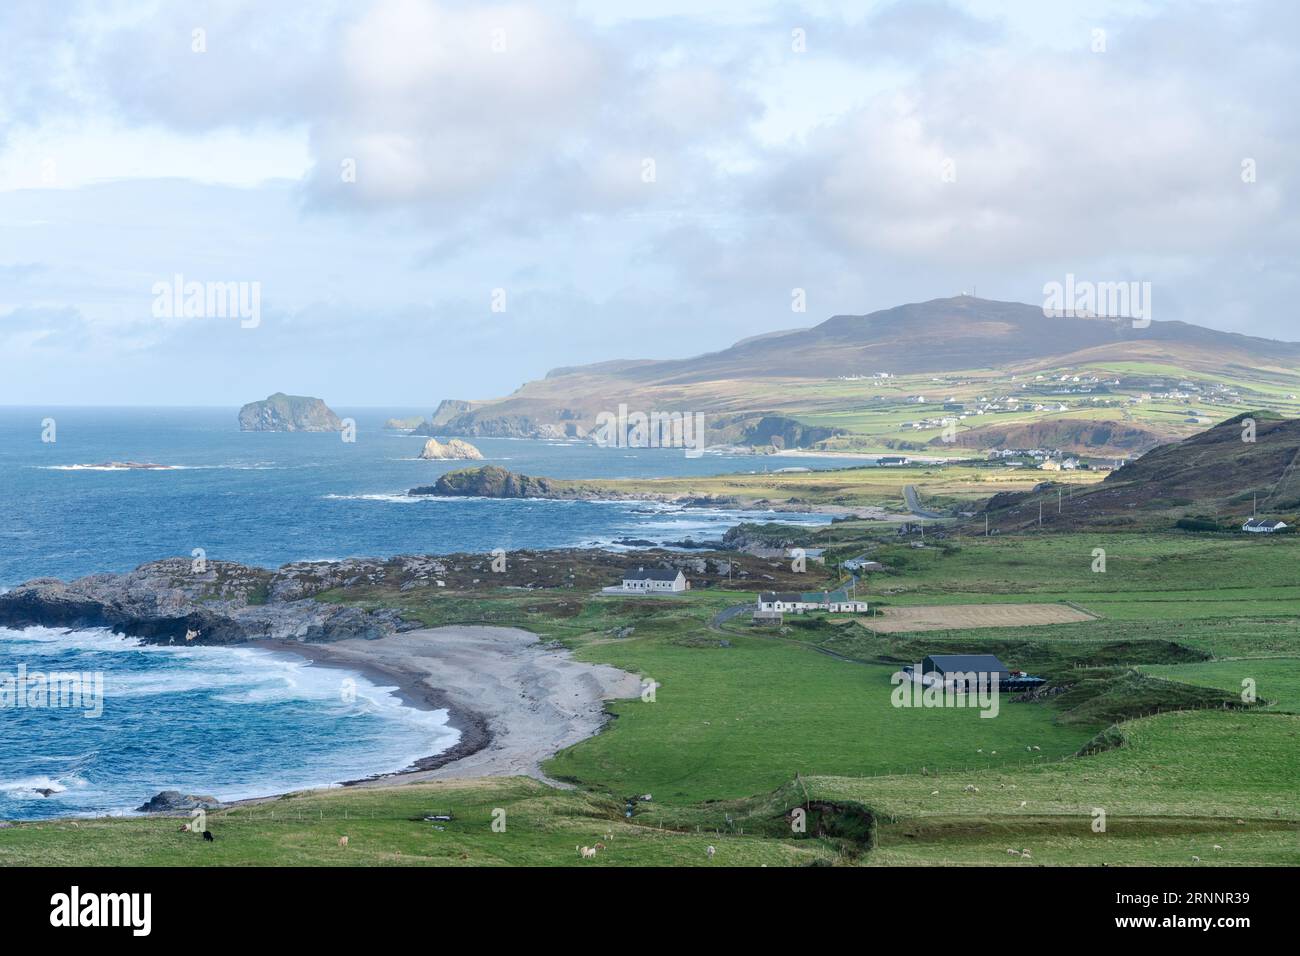 View at Banba's Crown, Malin Head, Inishowen, County Donegal, Ireland. The most northerly point in Ireland. Stock Photo